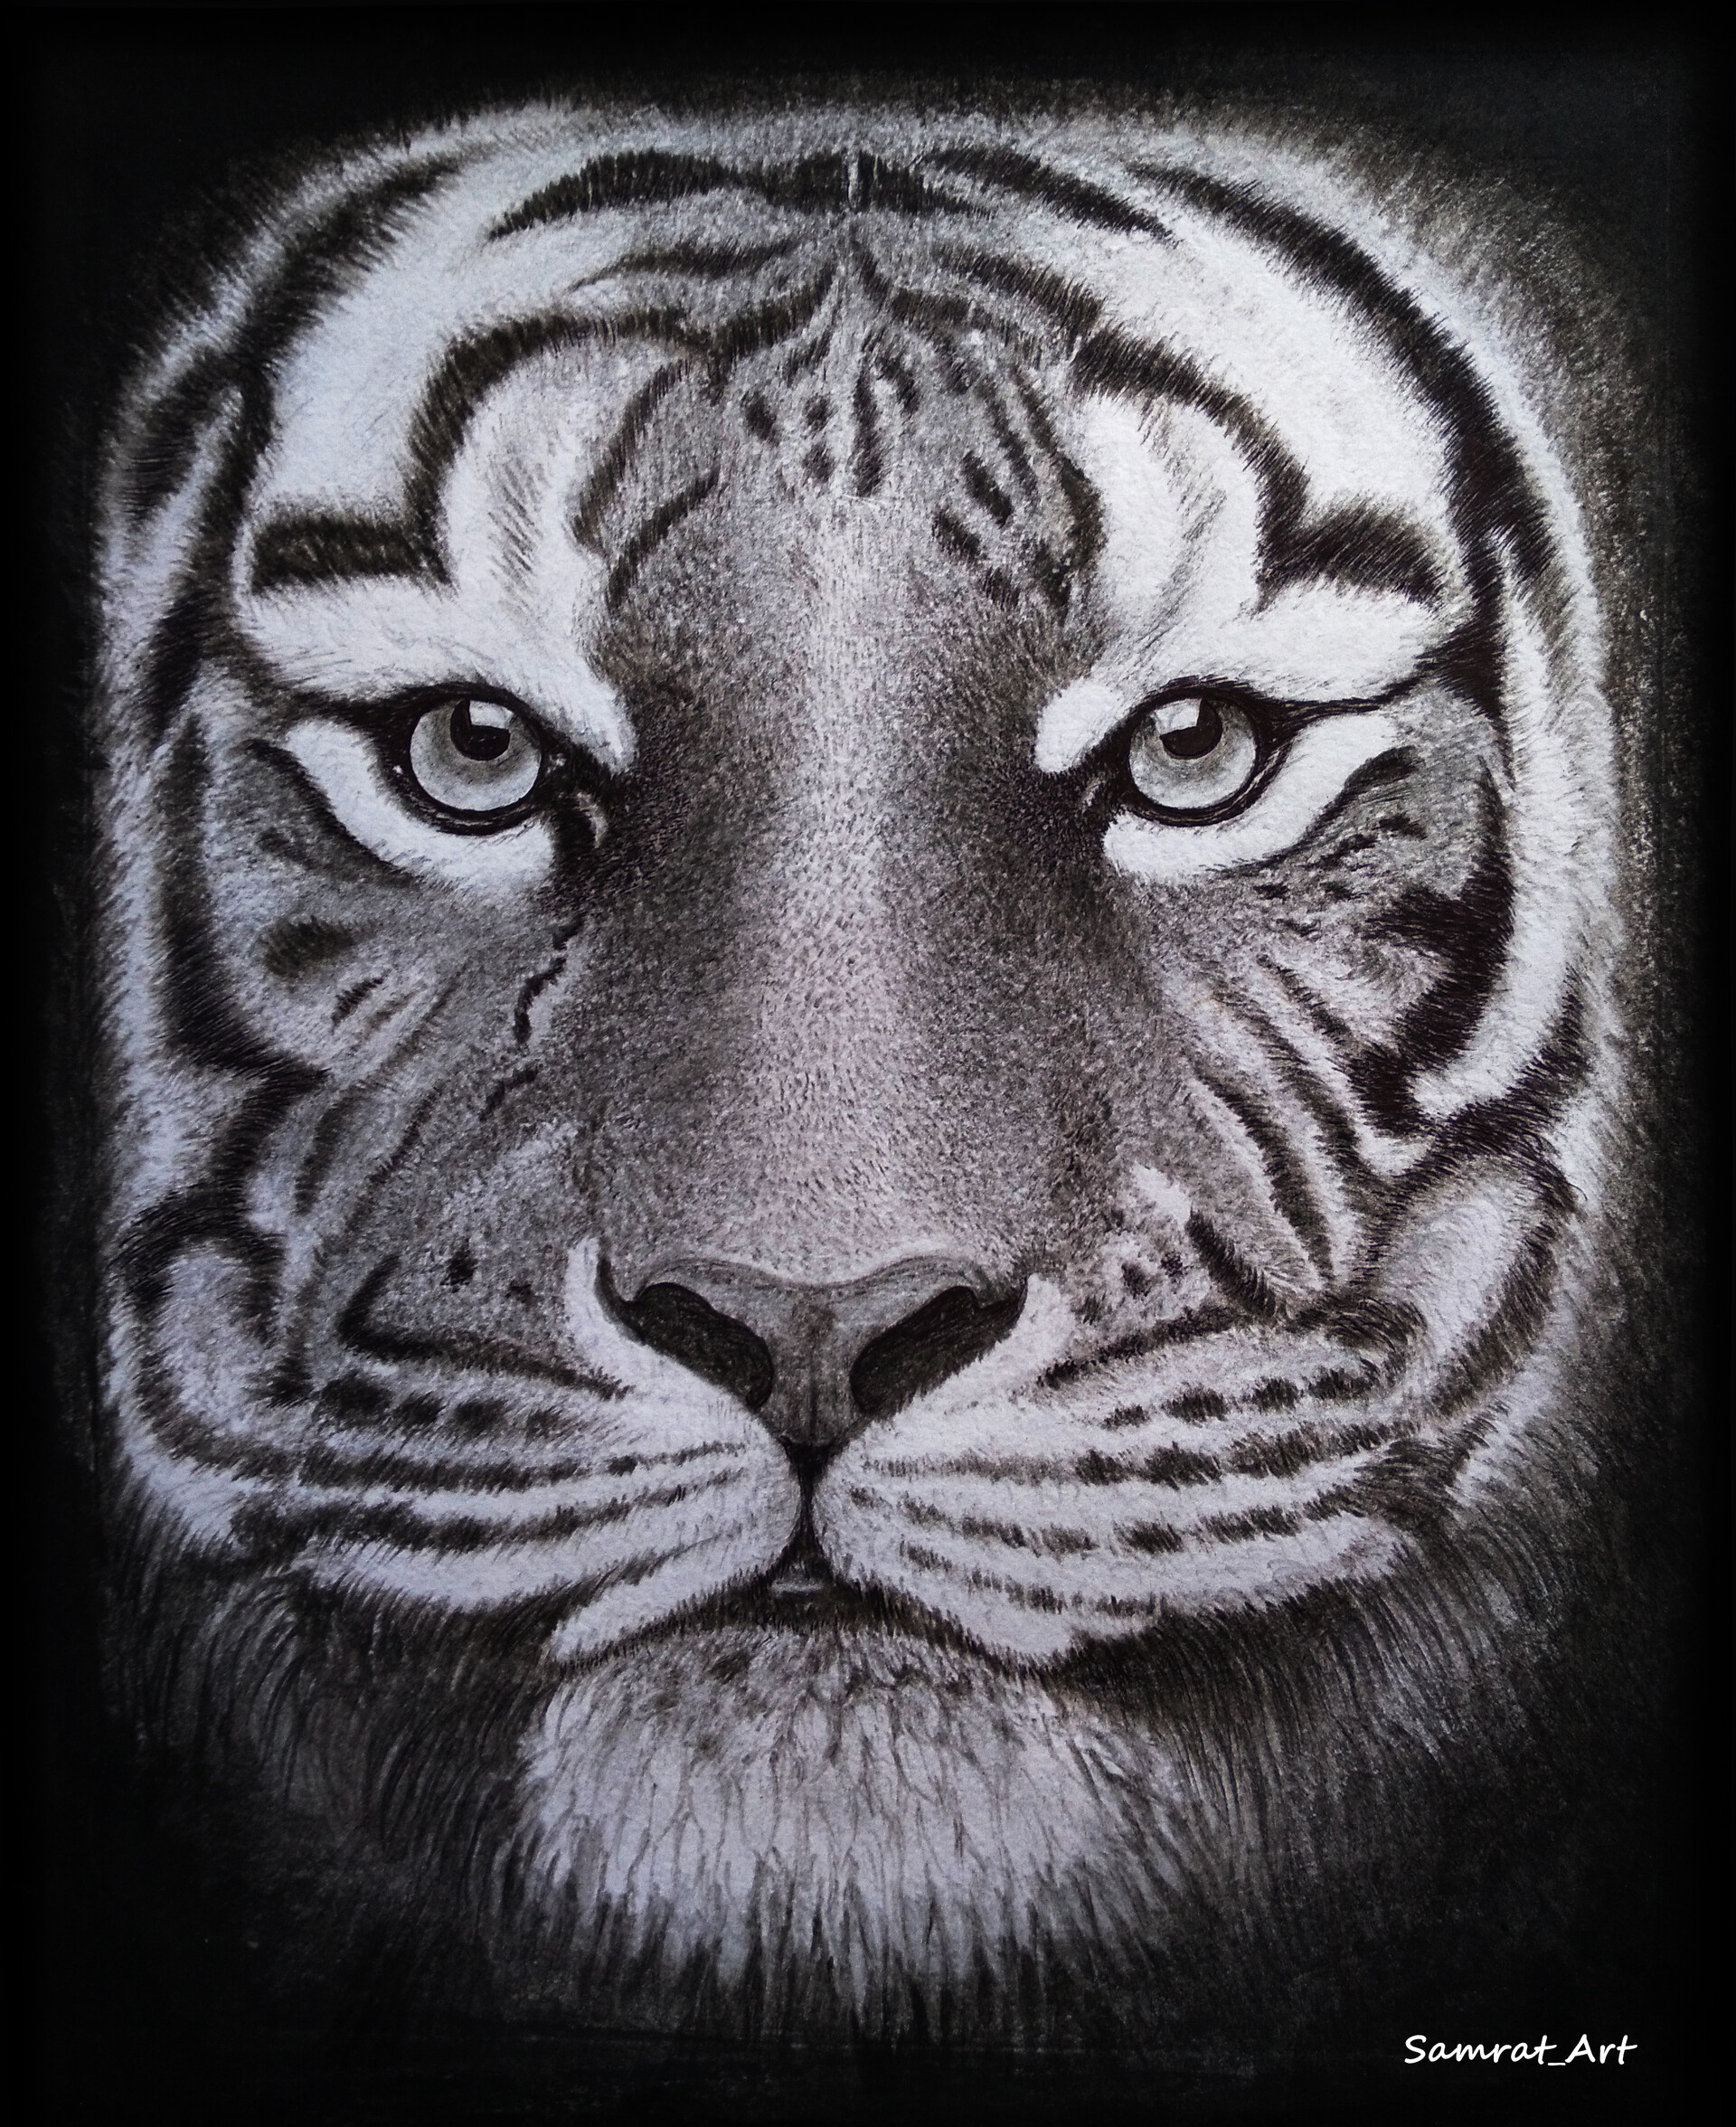 Sachin Art World  The Angry Tiger pencil sketch  Facebook